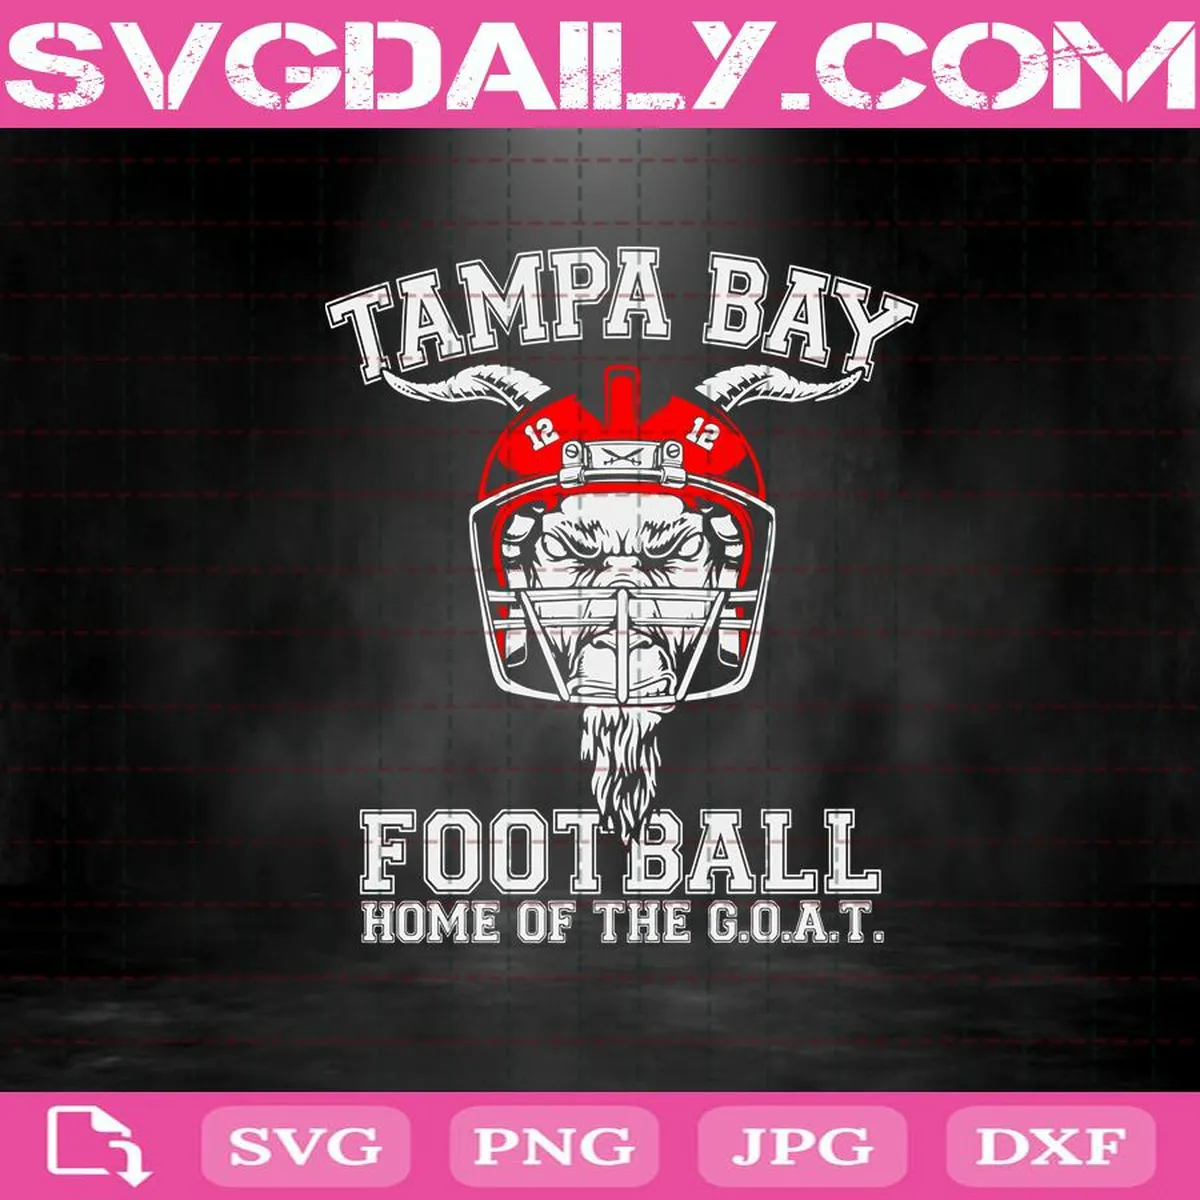 Tampa Bay Football Home Of The G.O.A.T Svg, Tampa Bay Football Svg, Tampa Bay Champion Svg, Tampa Bay Svg, Football Svg